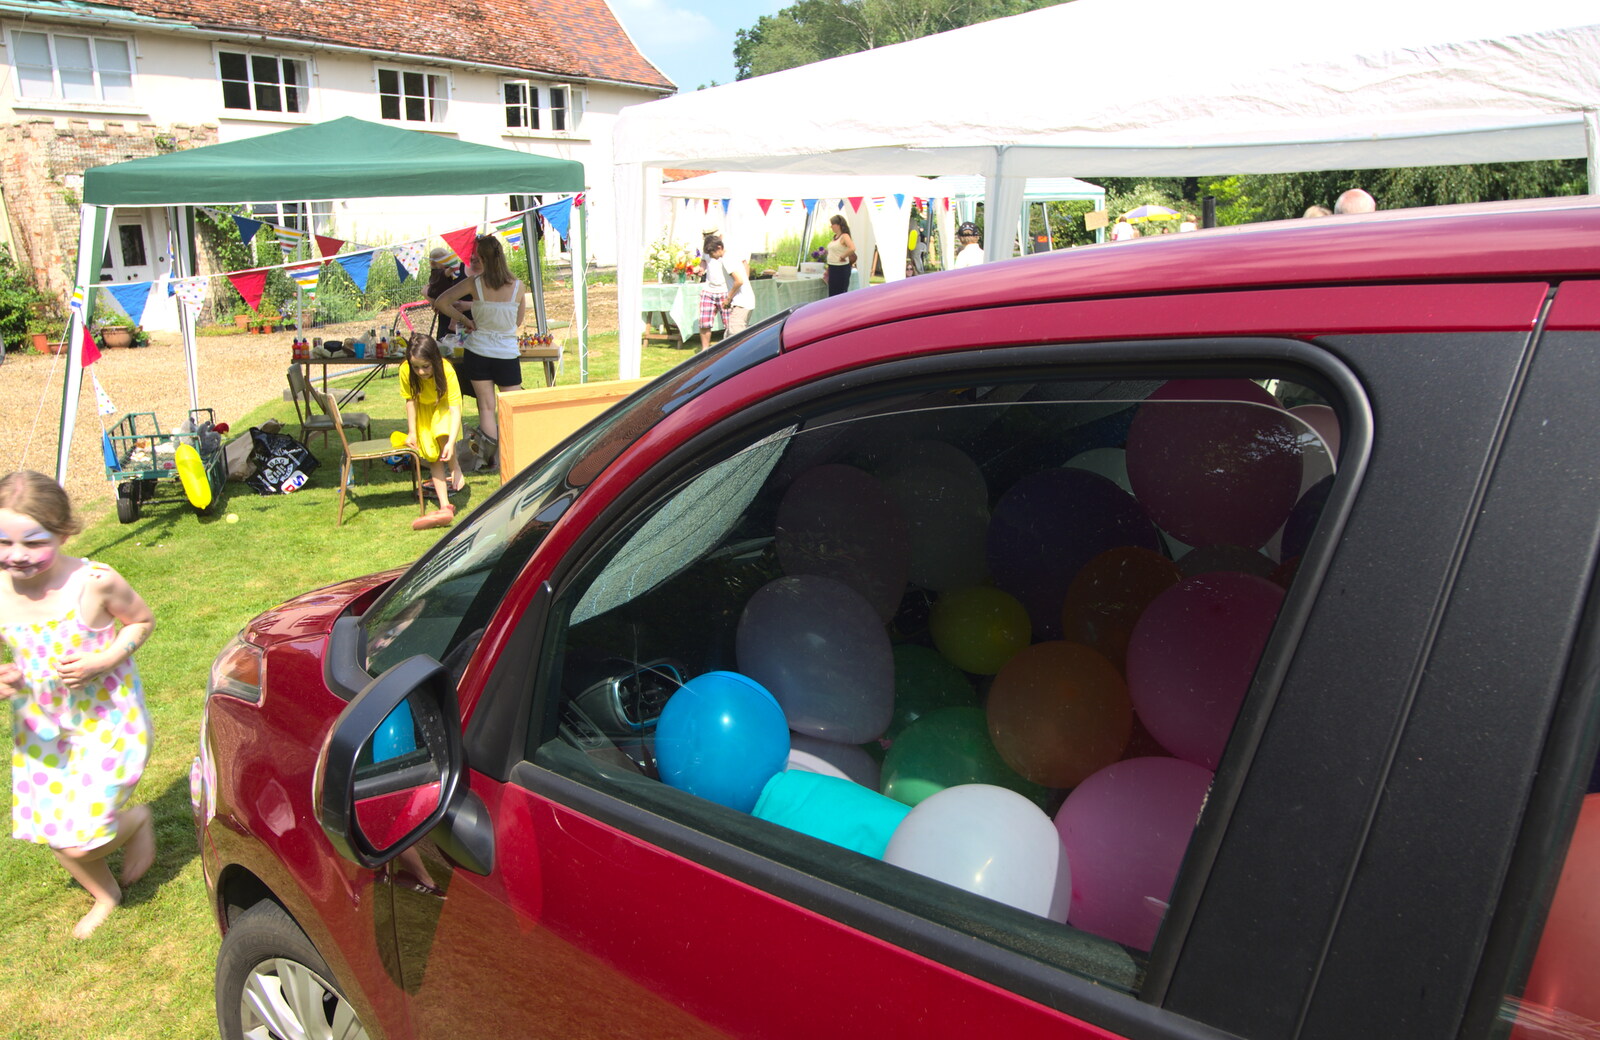 There's a car full of balloons from Marconi's Demolition and Brome Village Fete, Chelmsford and Brome, Suffolk - 6th July 2013